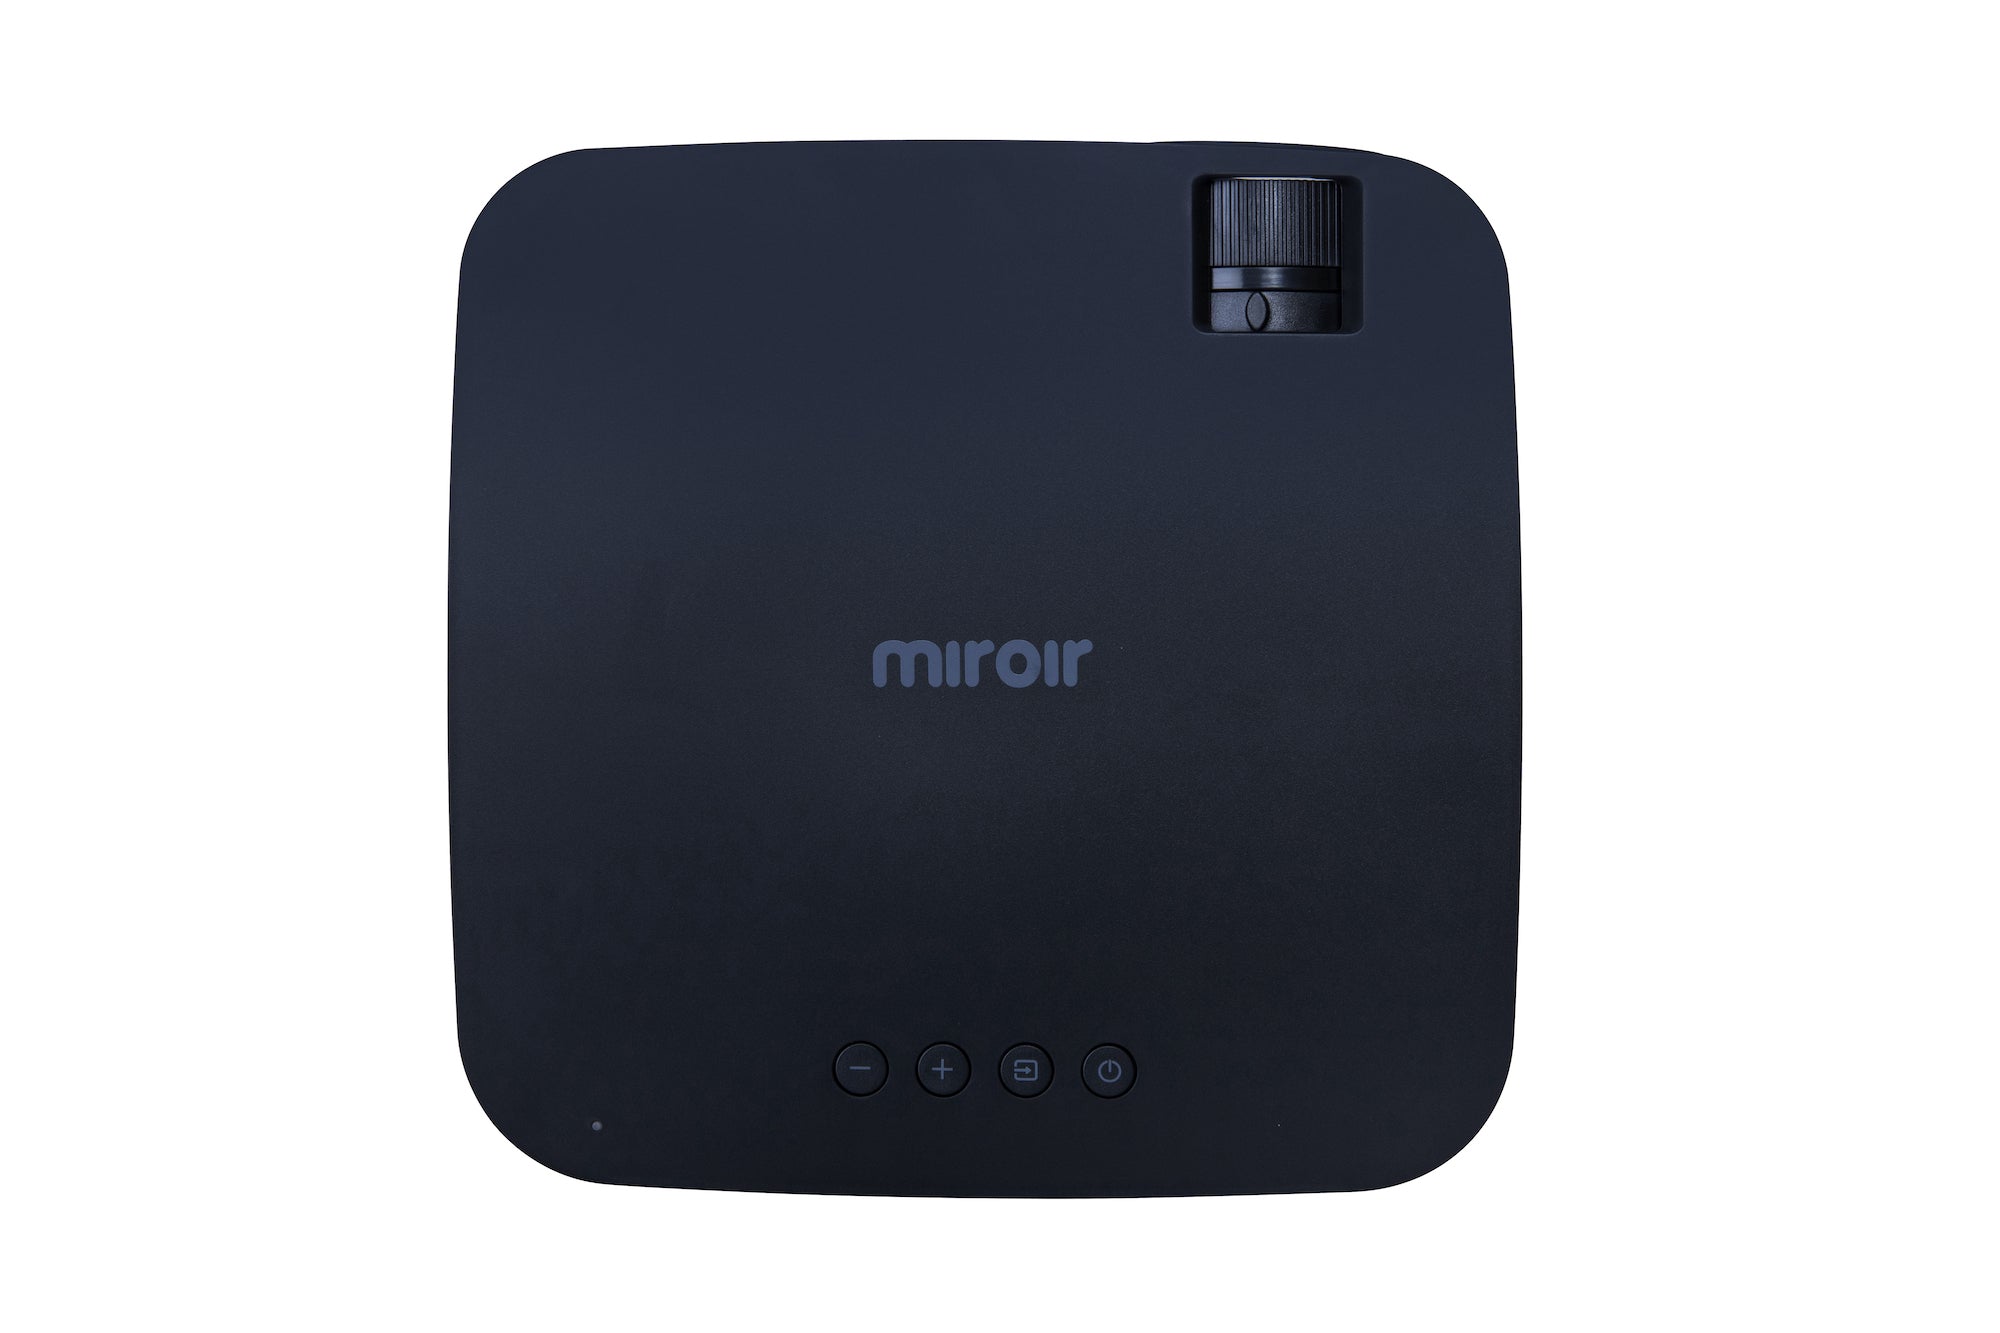 Miroir L300 Full HD Portable LCD Projector, experience stunning visuals with 1080p native resolution, a built-in speaker, an LED lamp, & 2 HDMI inputs. Upgrade your entertainment game!